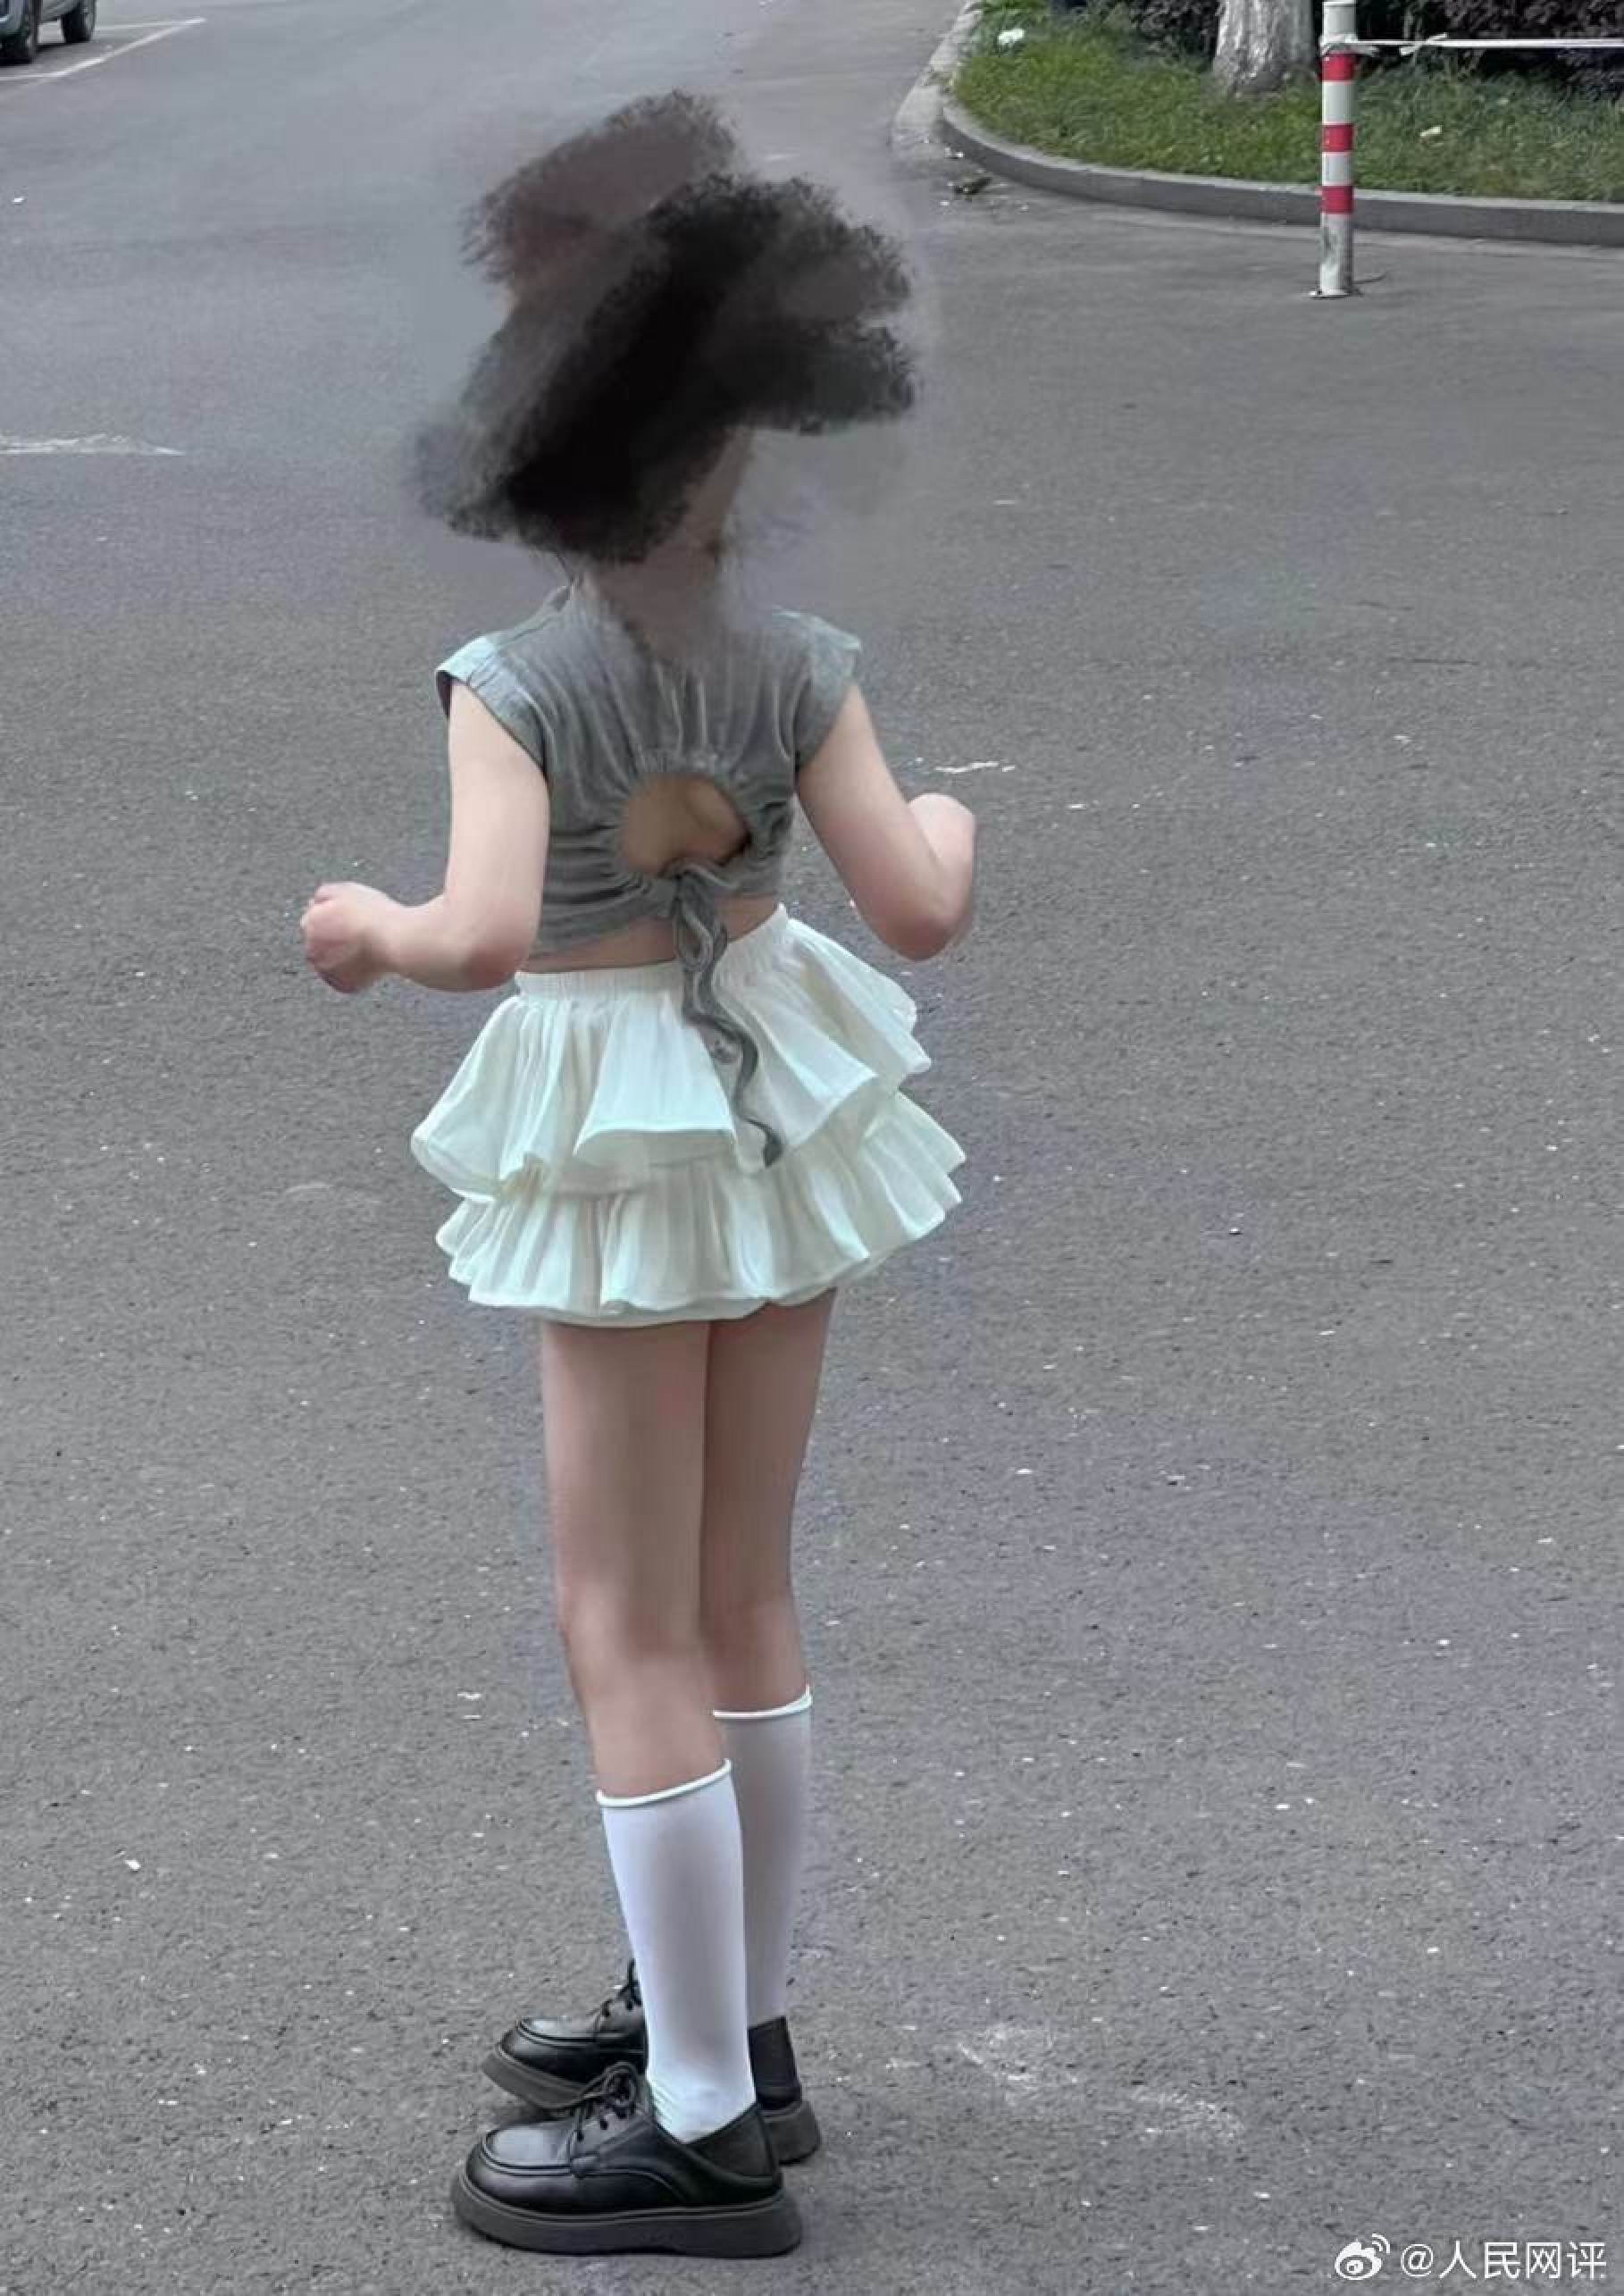 Baby spicy style' fashion that parades little girls in tight skirts and  low-cut dresses slammed by Chinese state media, derided as 'pornography' |  South China Morning Post